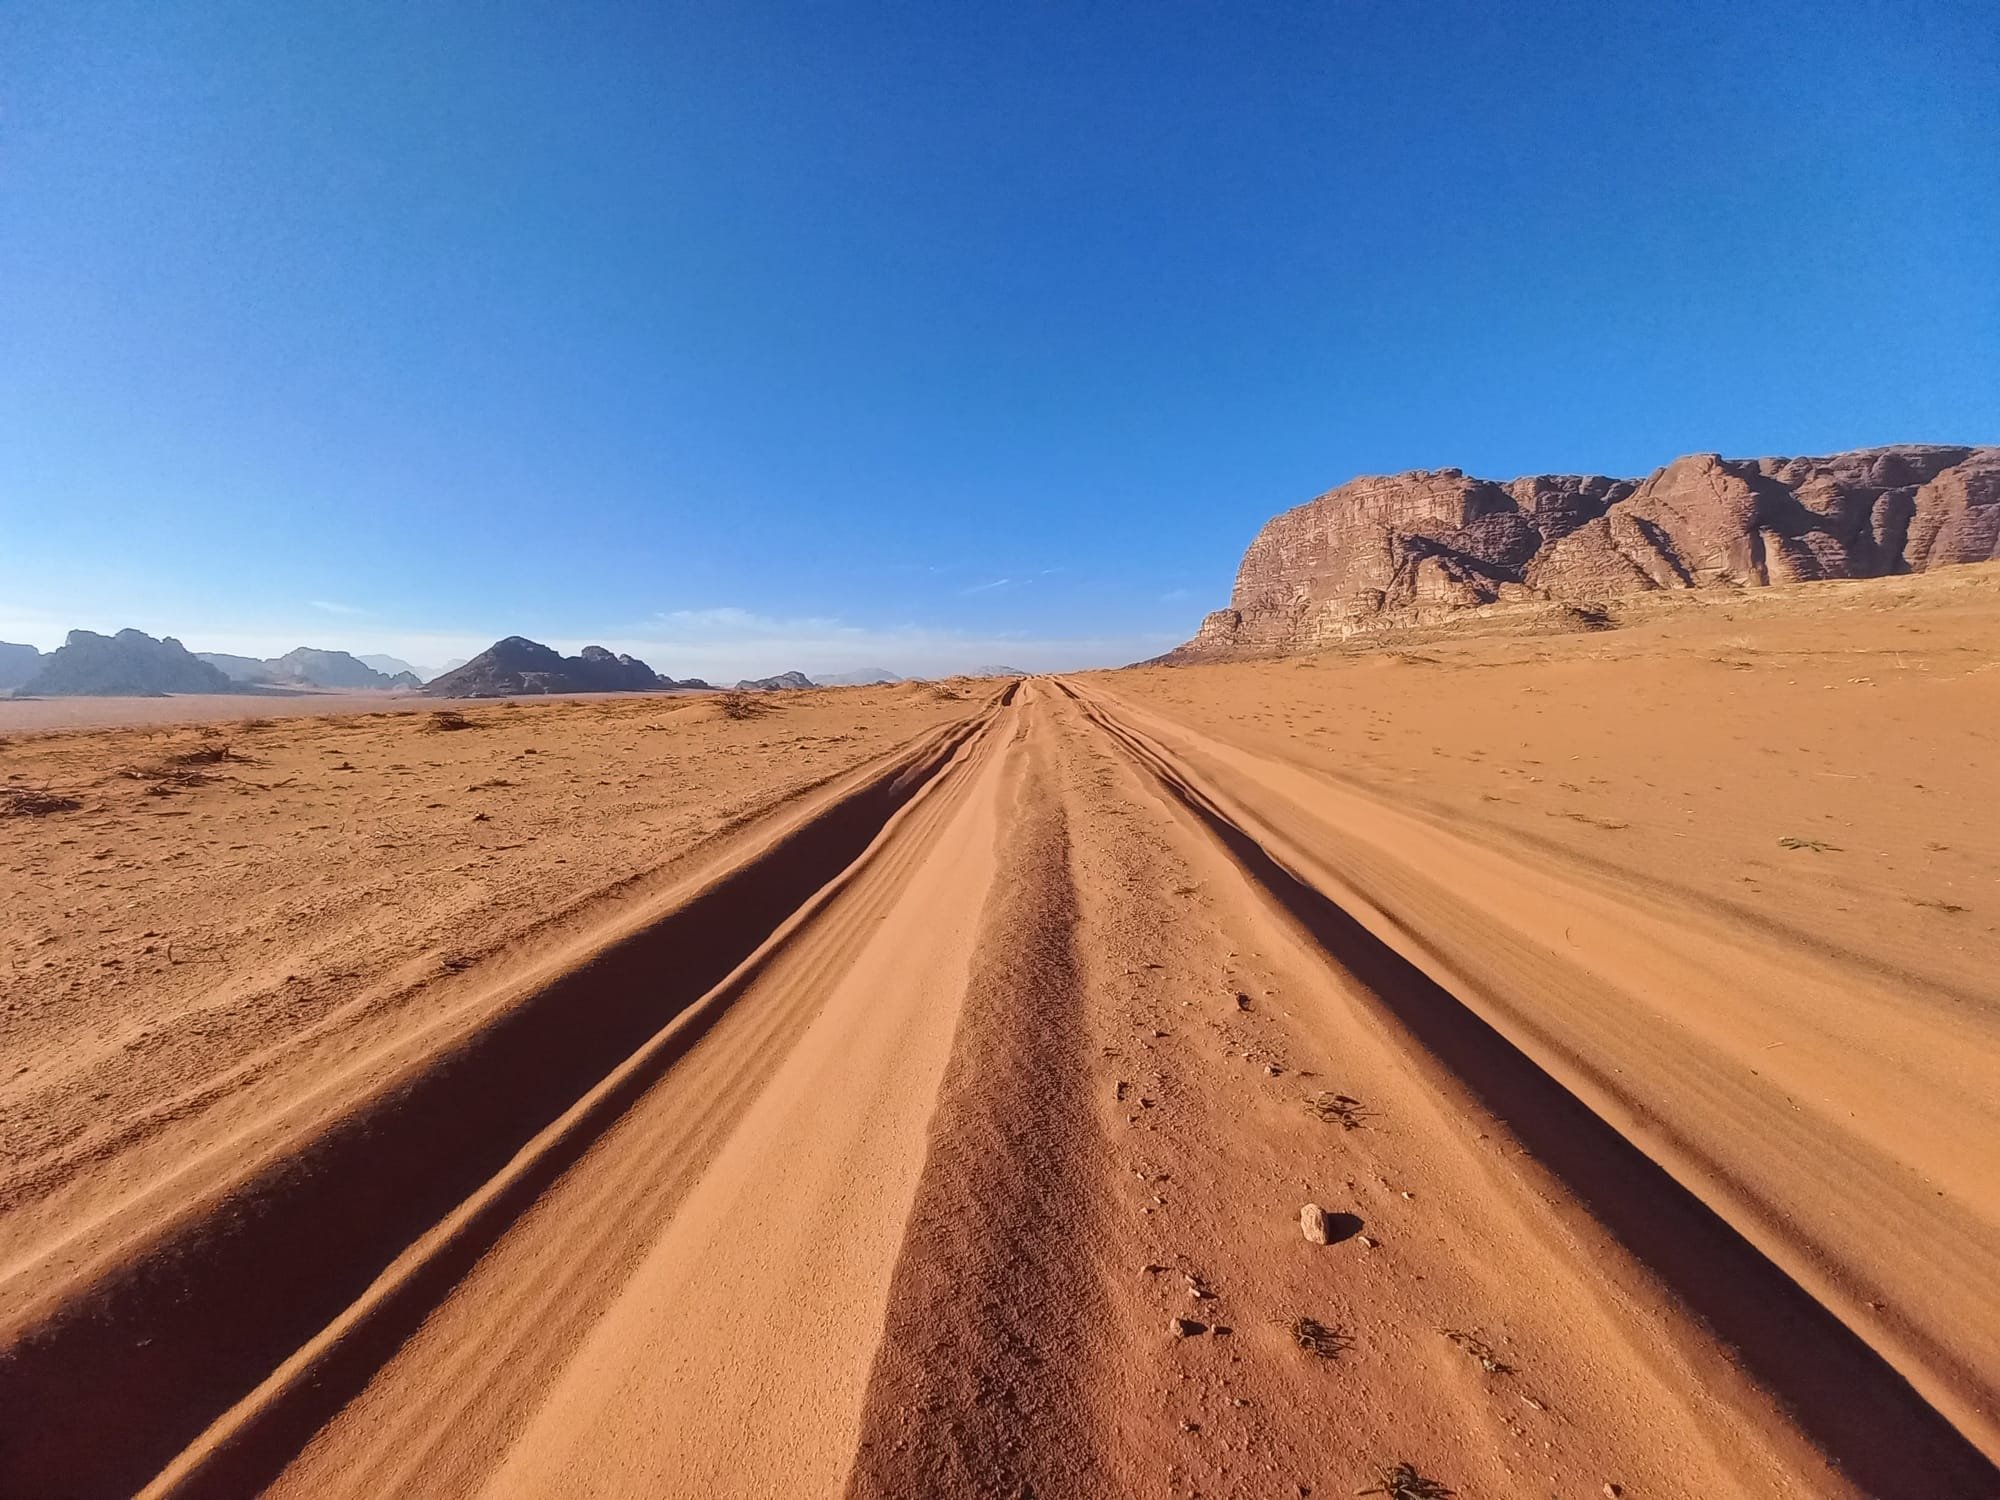 From Wadi Rum: Full day Jeep tour